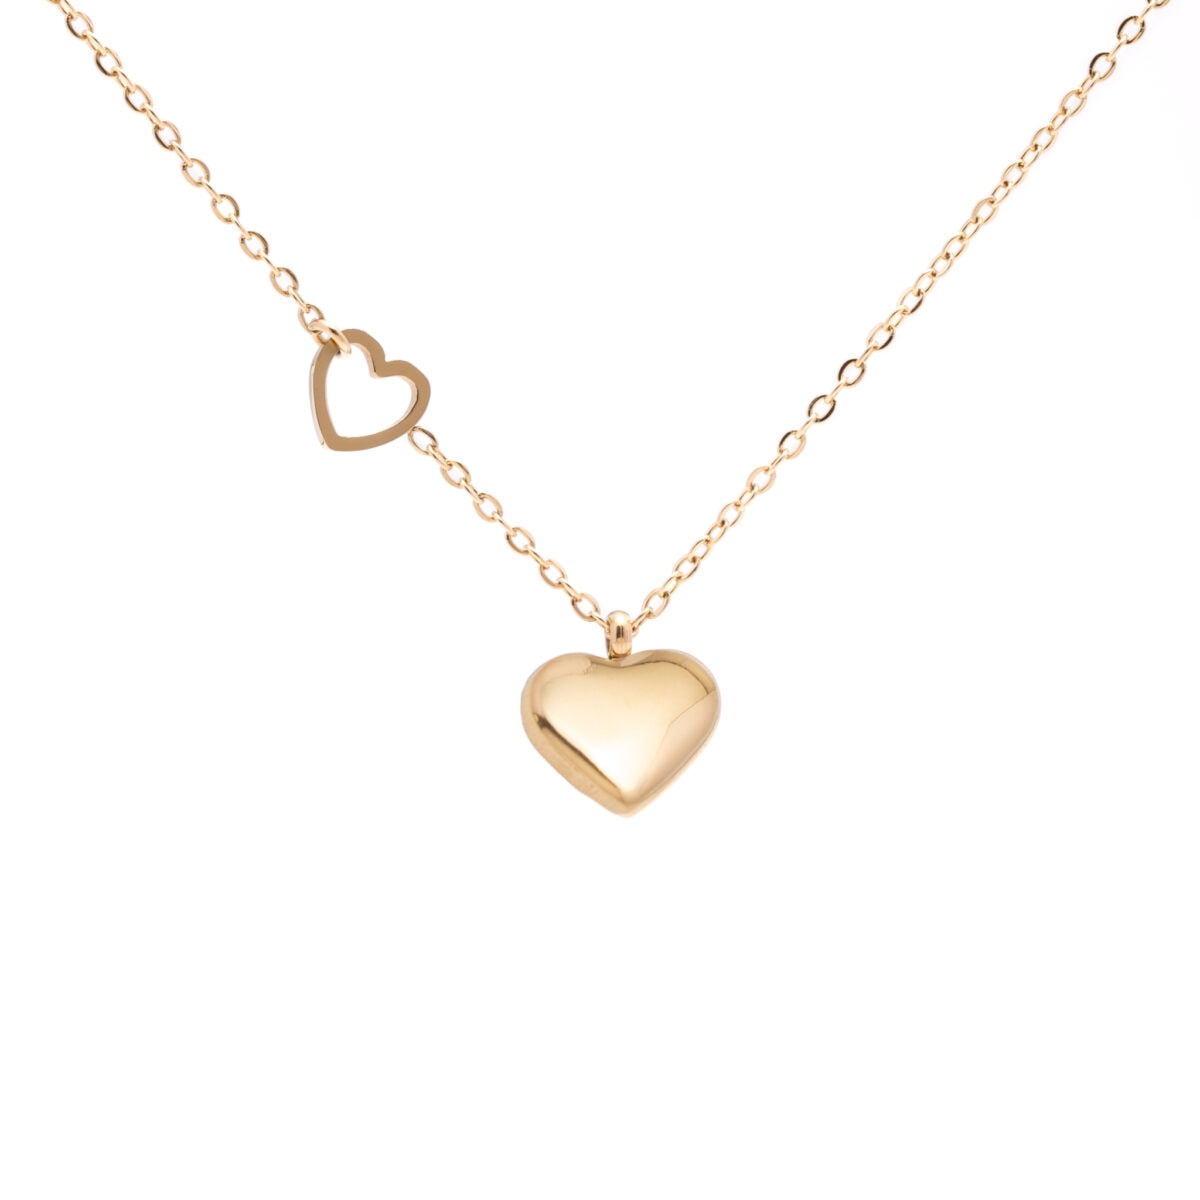 https://m.clubbella.co/product/bliss-duo-heart-necklace/ Bliss Duo heart necklace (2)